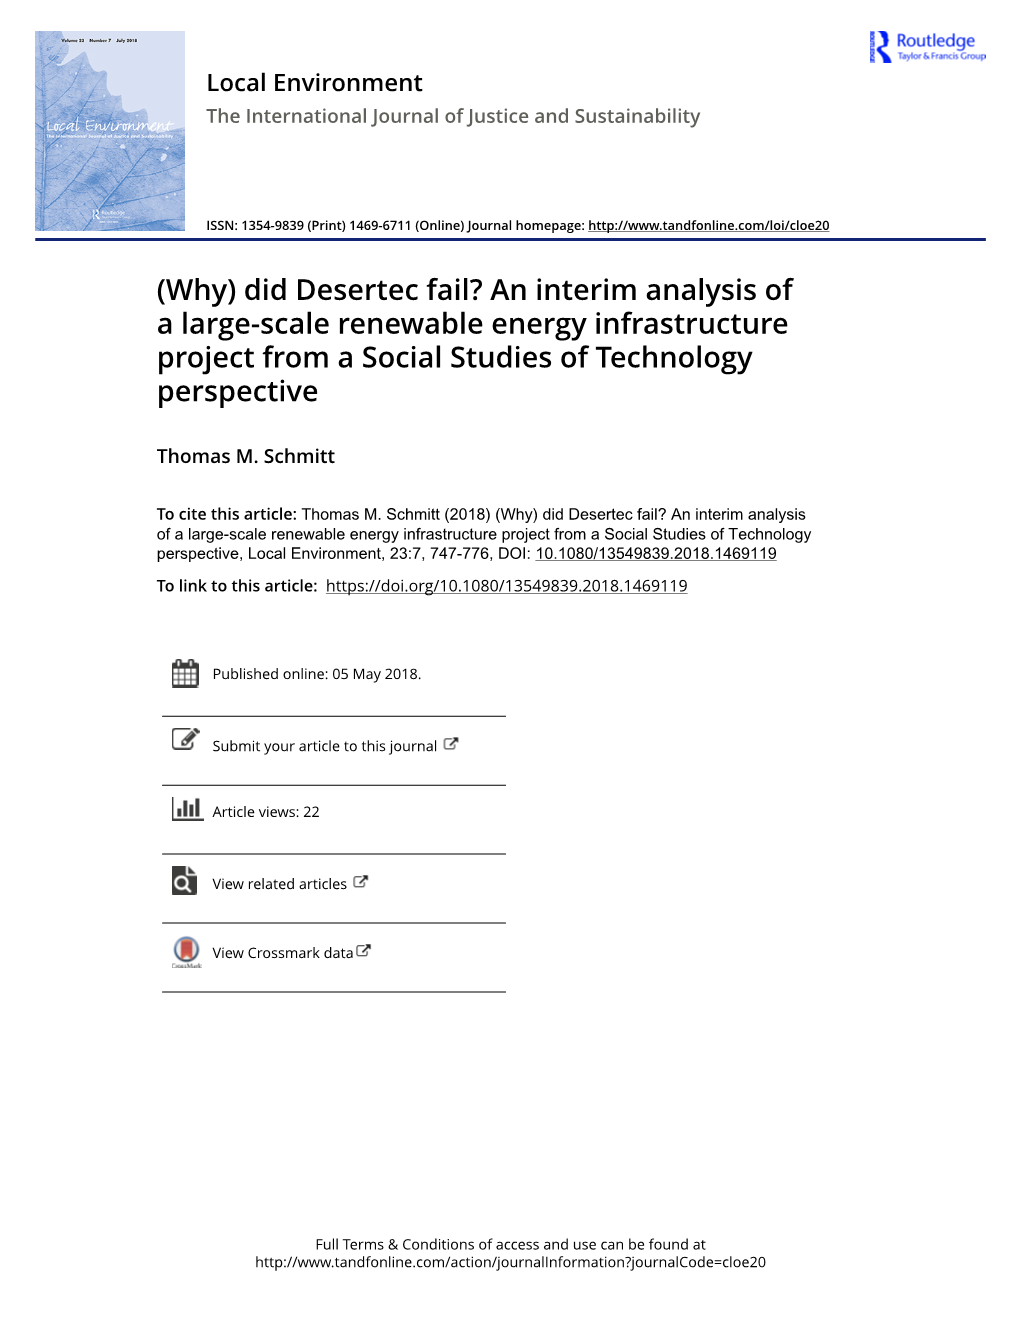 (Why) Did Desertec Fail? an Interim Analysis of a Large-Scale Renewable Energy Infrastructure Project from a Social Studies of Technology Perspective